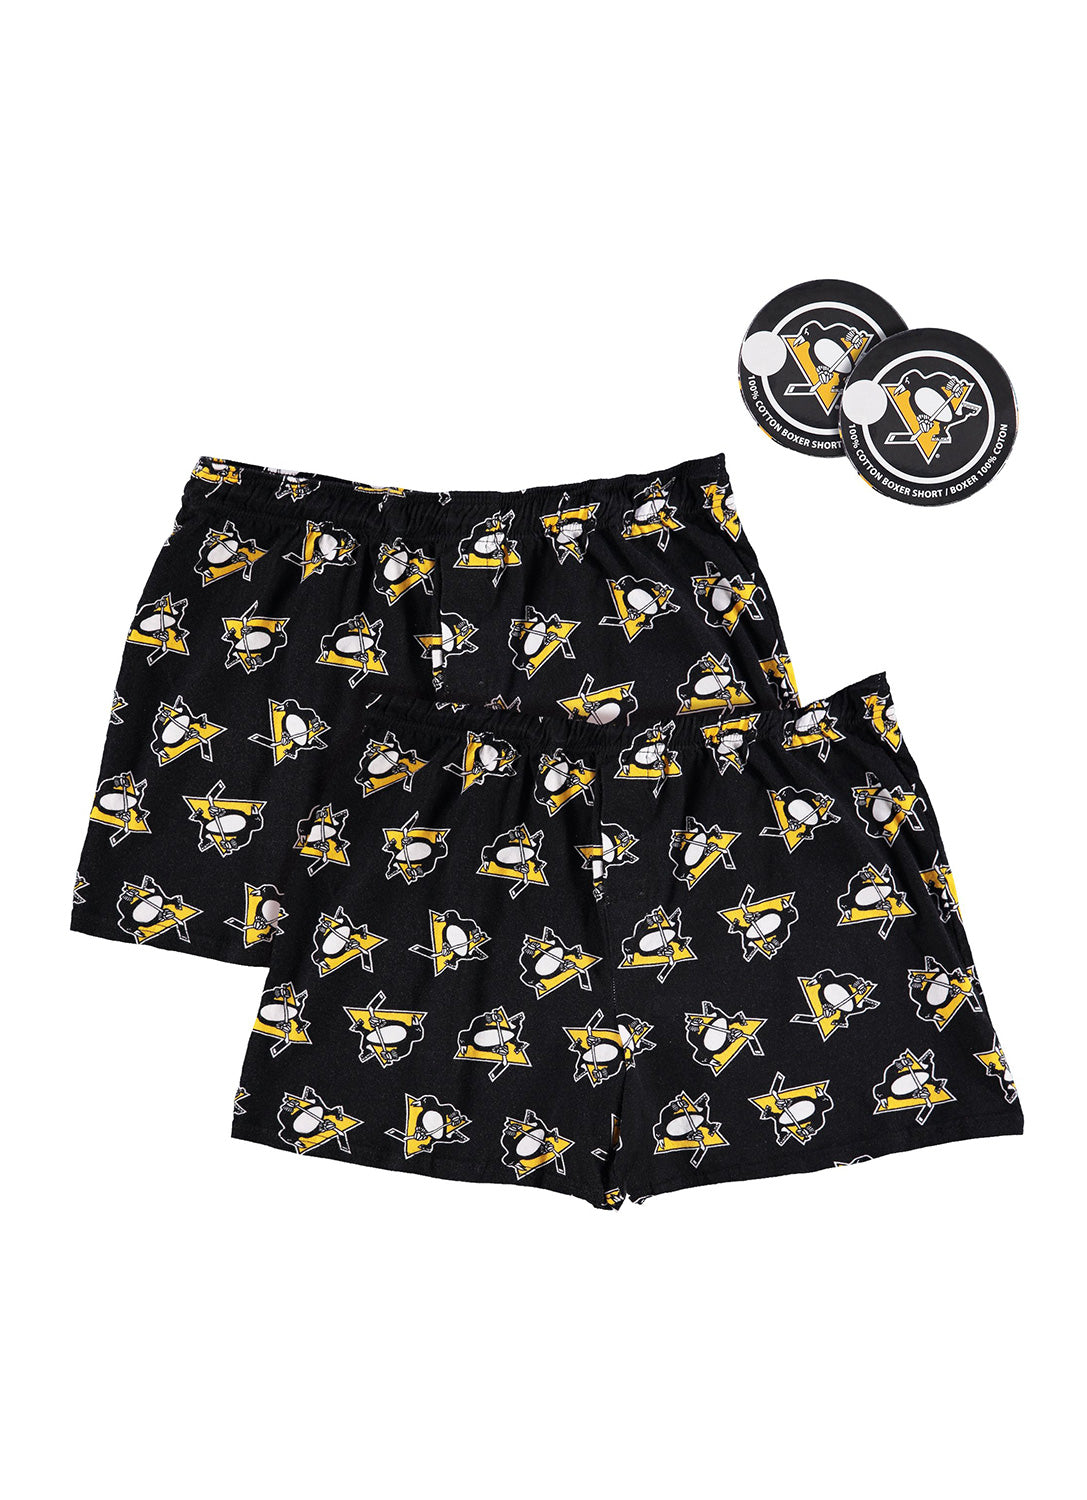 Pair of mens boxers with Pittsburgh Penguins print (black)